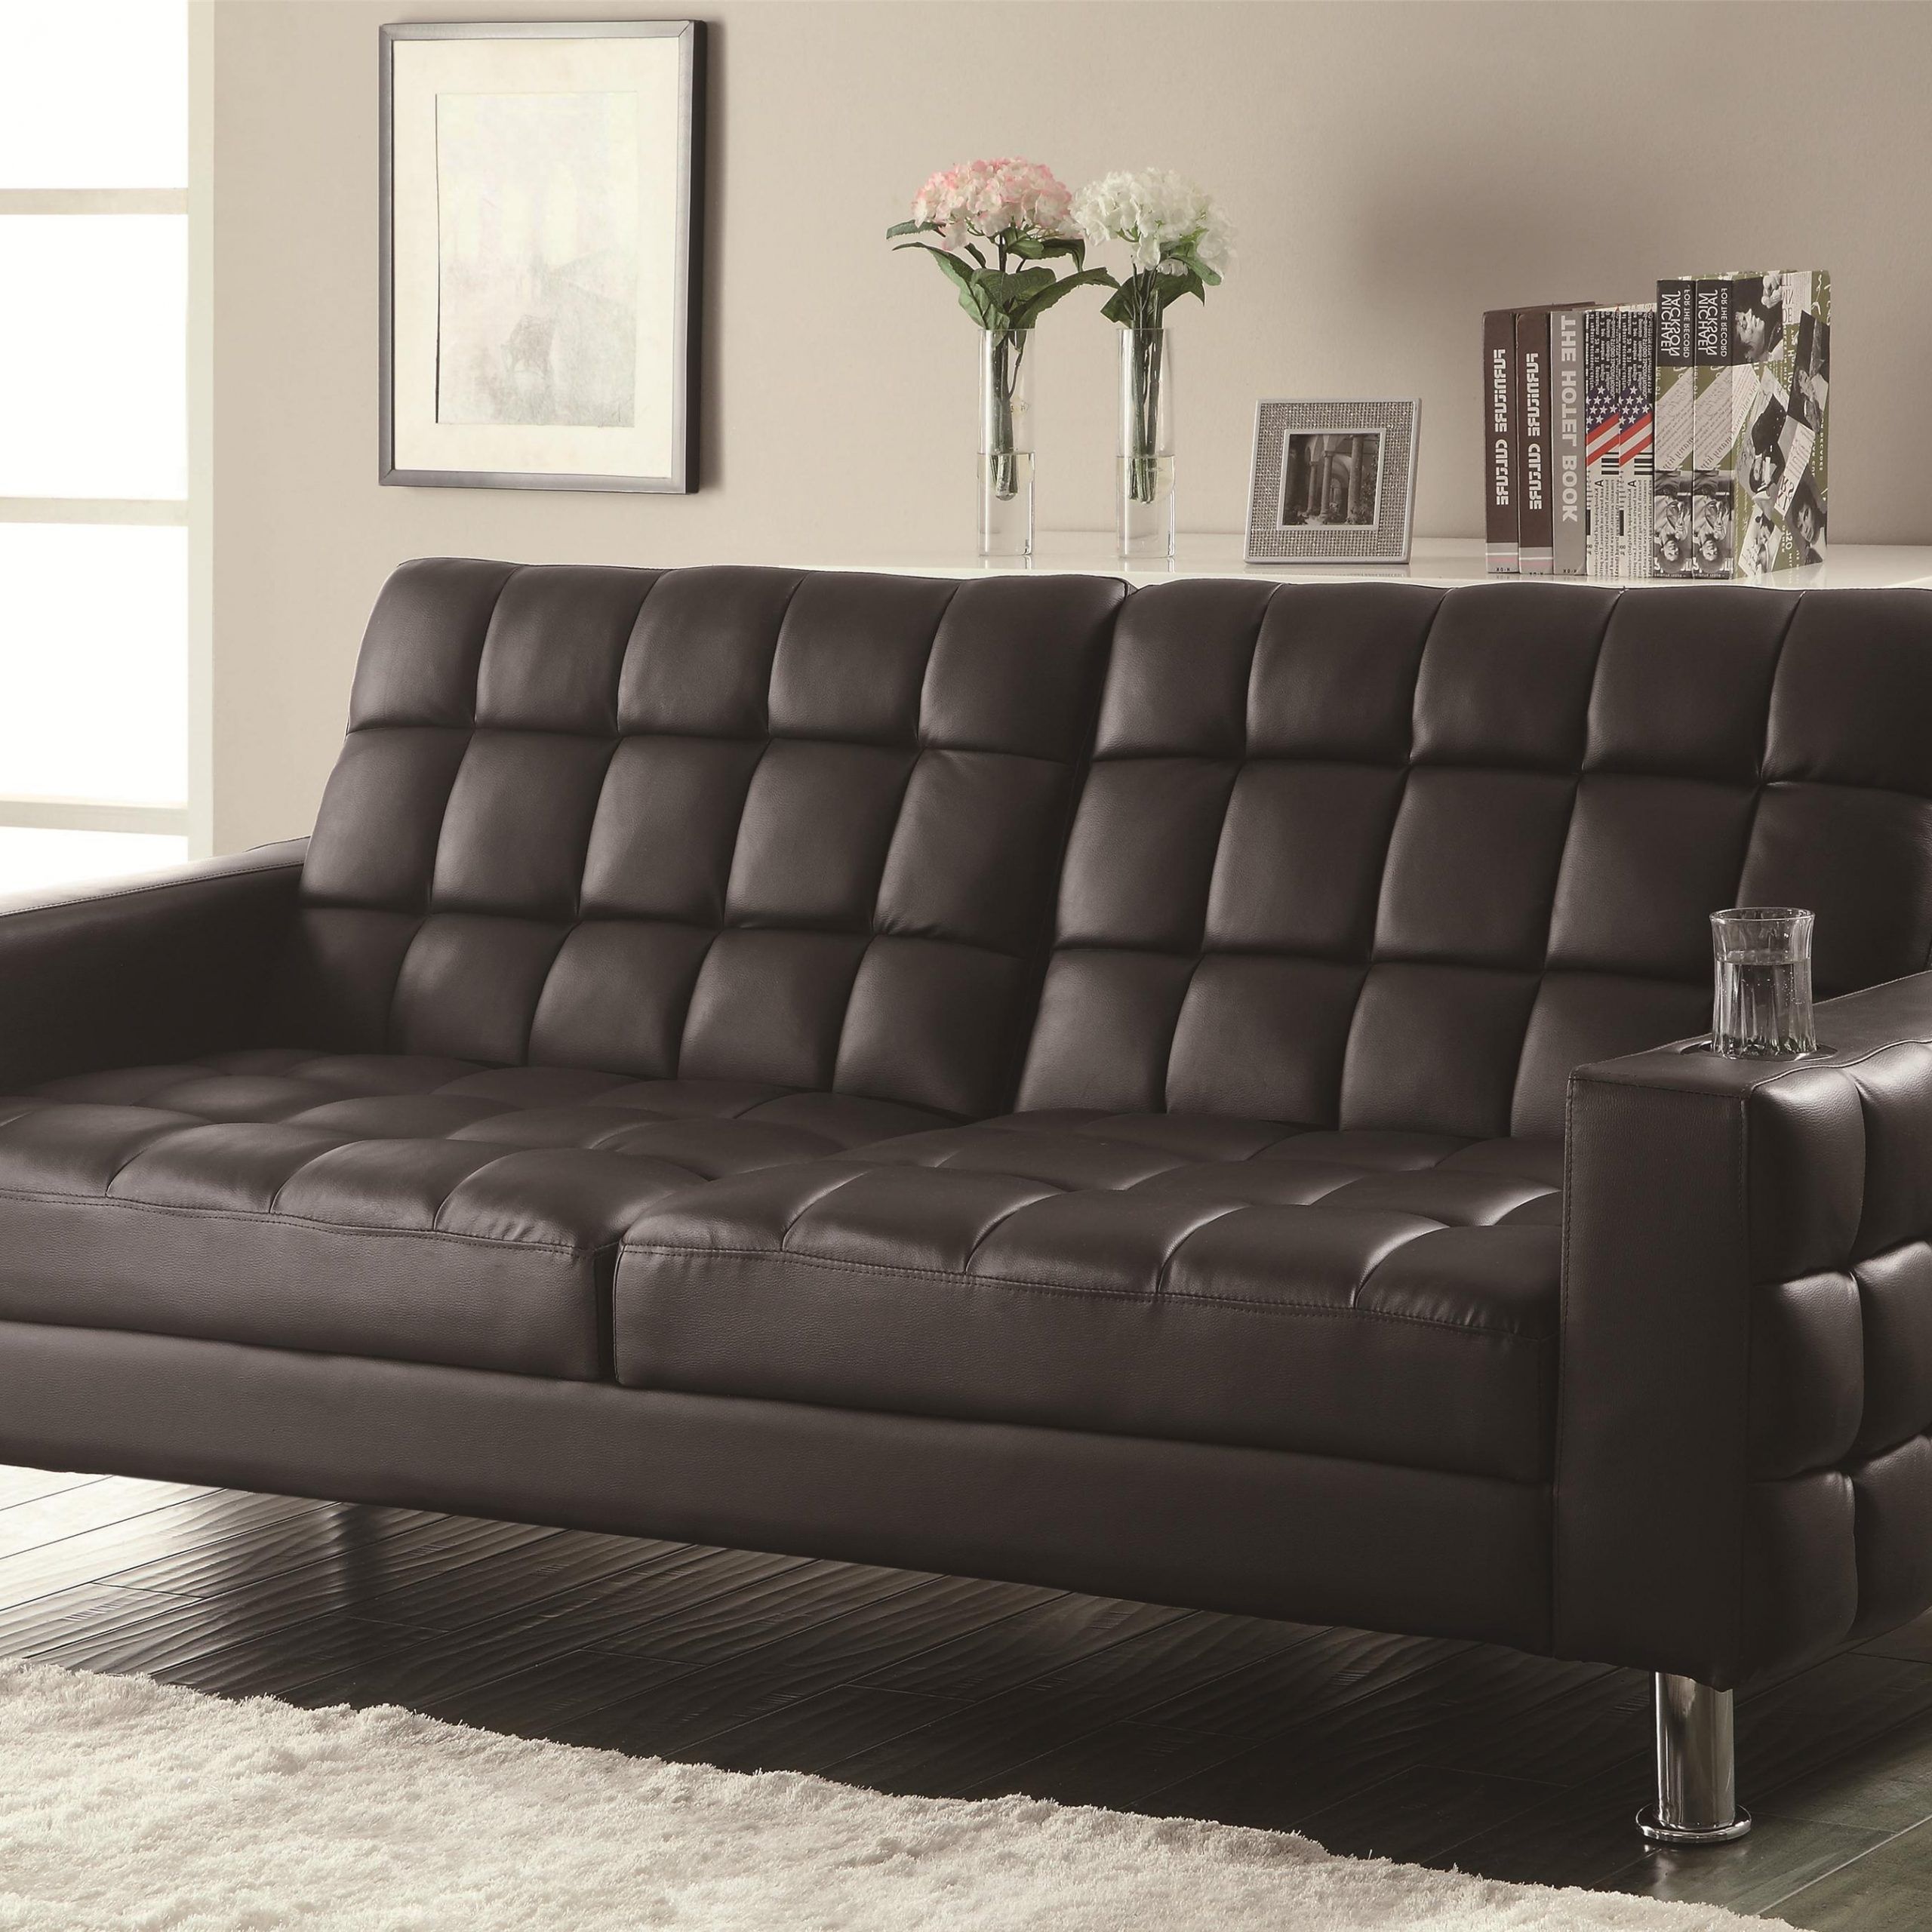 Prato Storage Sectional Futon Sofas For Popular Coaster Sofa Beds And Futons Adjustable Sofa Bed With Cup (View 7 of 20)